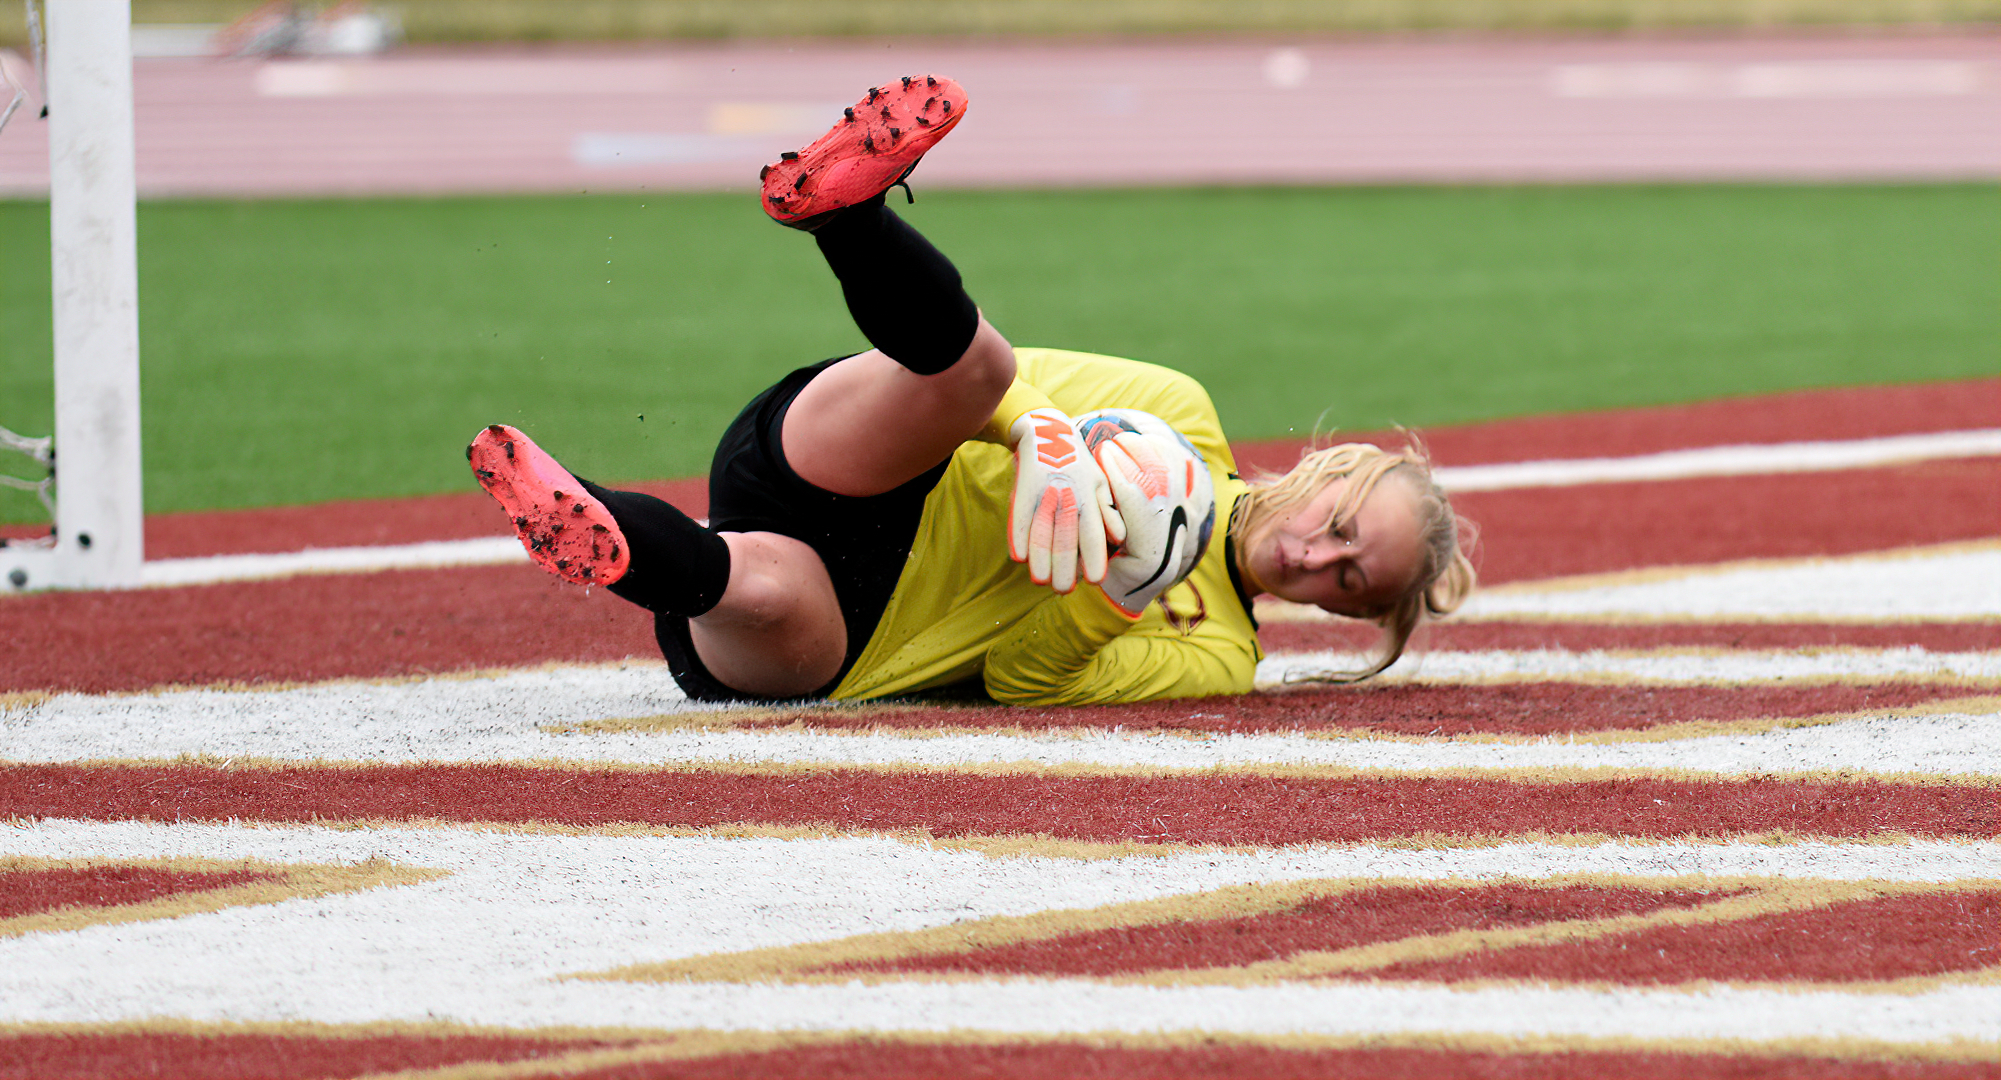 Freshman goalie Breanna Nelson makes one of her six saves in the Cobbers' game against Augsburg on Sunday.